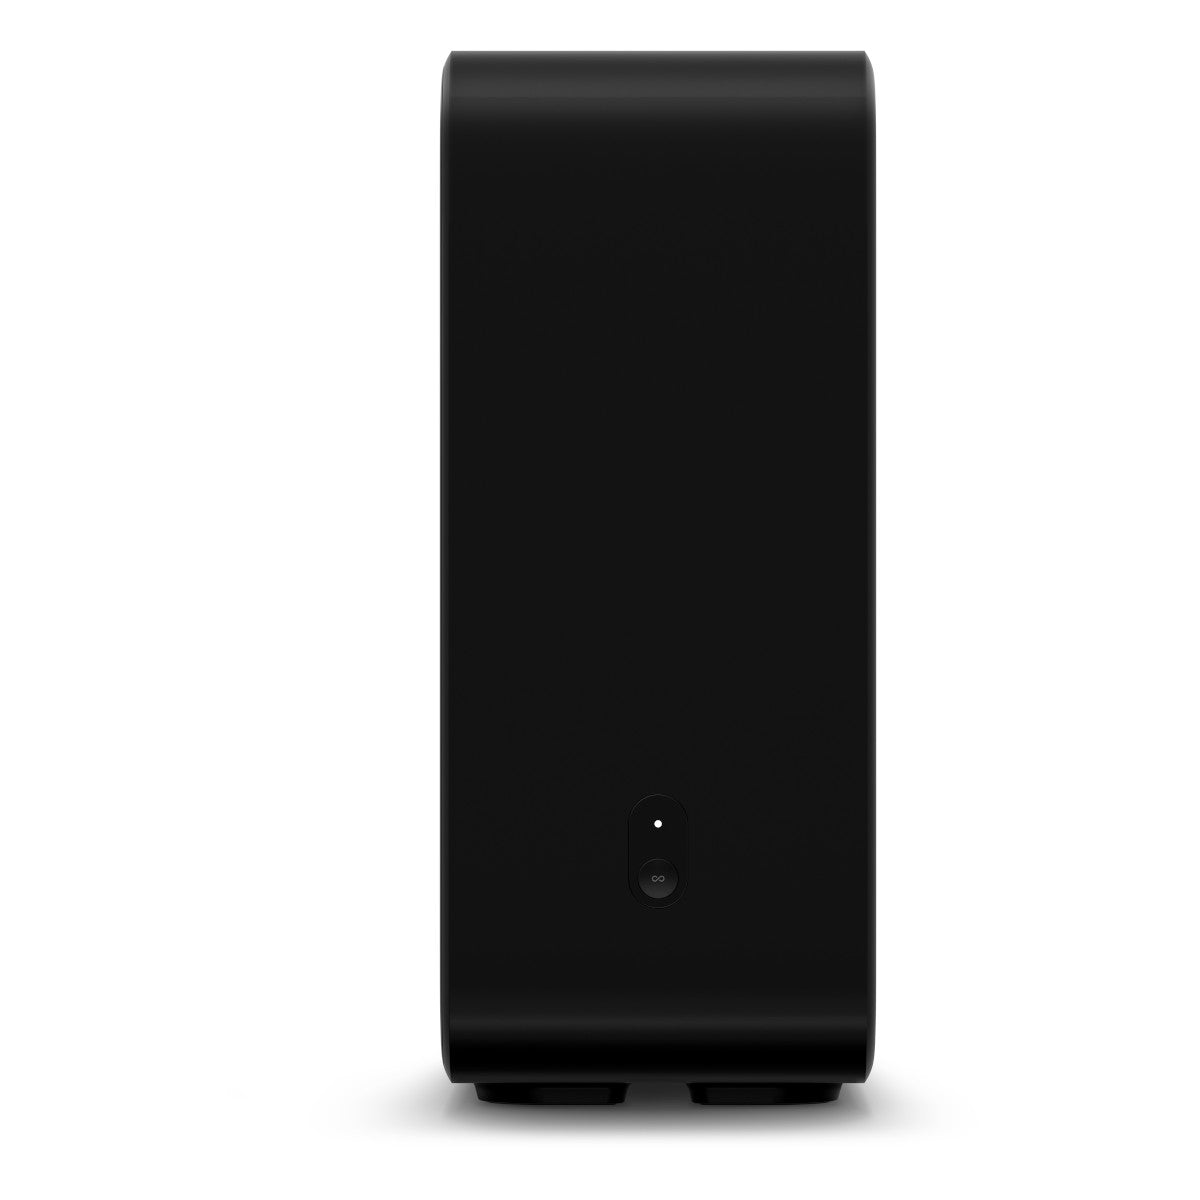 Sonos Sub (Gen 3) Wireless | (Black) Home Stereo Theater Wide World Subwoofer for